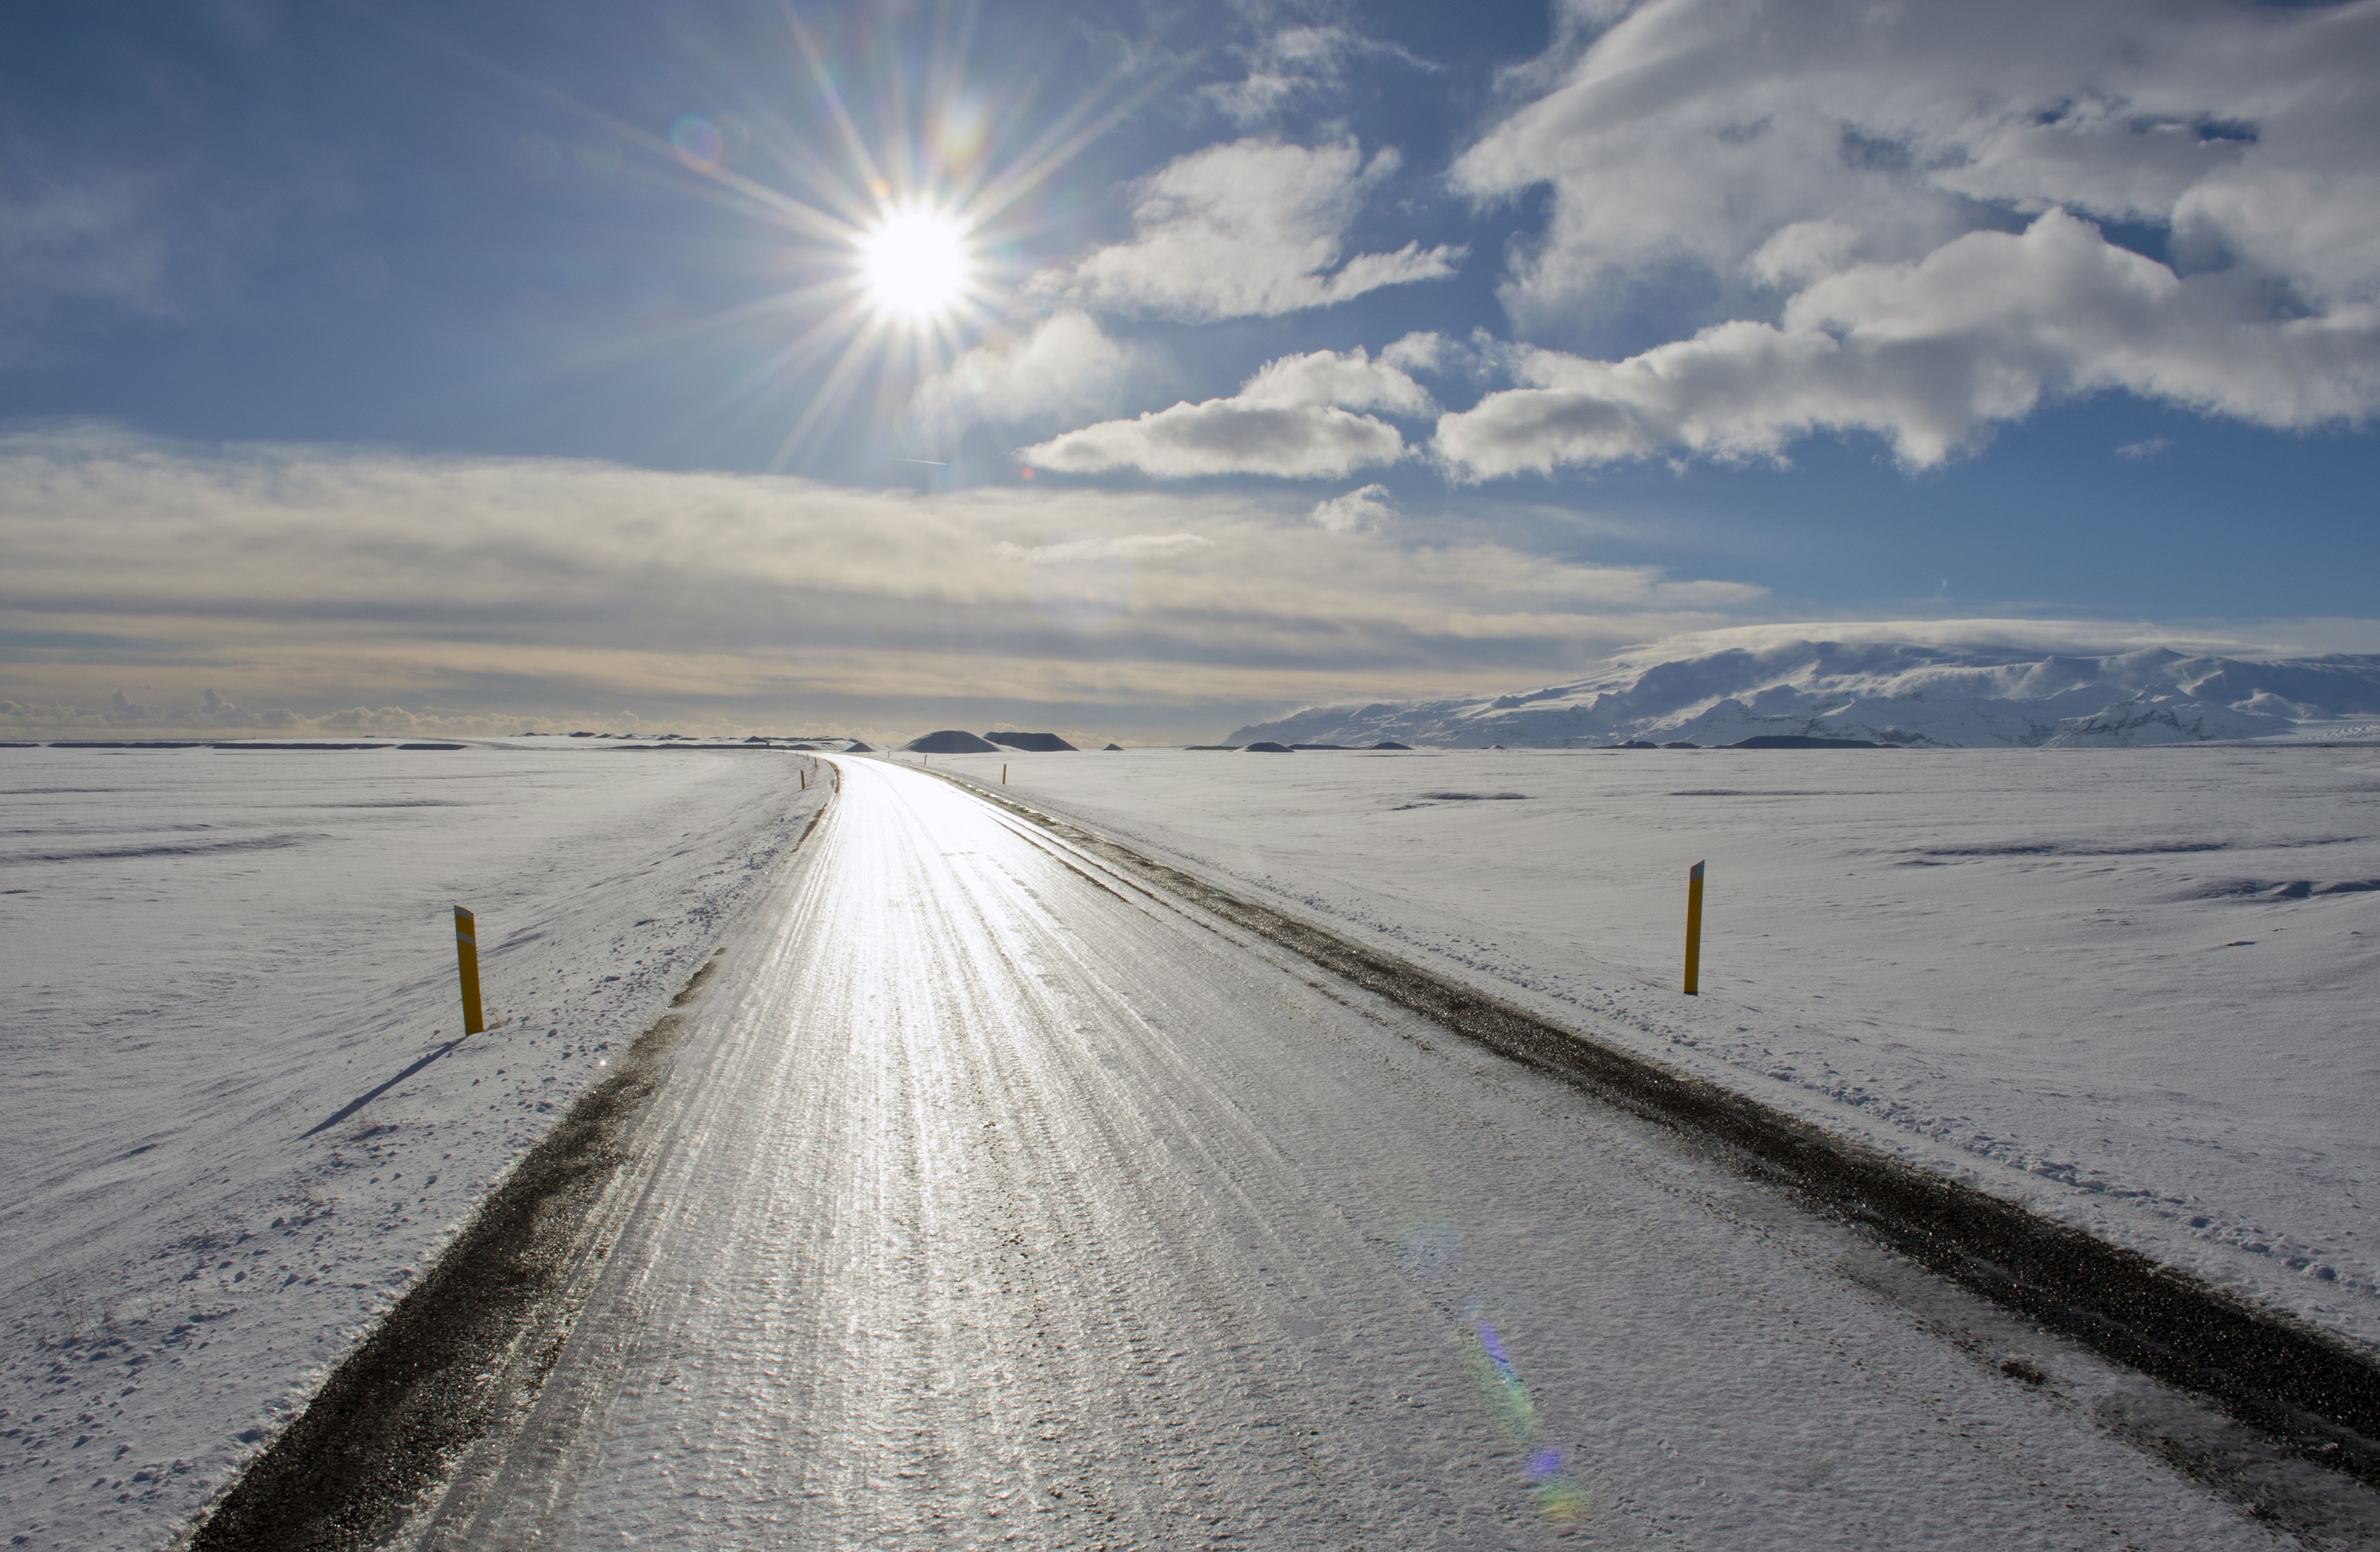 Tips for Driving on Icy Roads - Robert J. DeBry